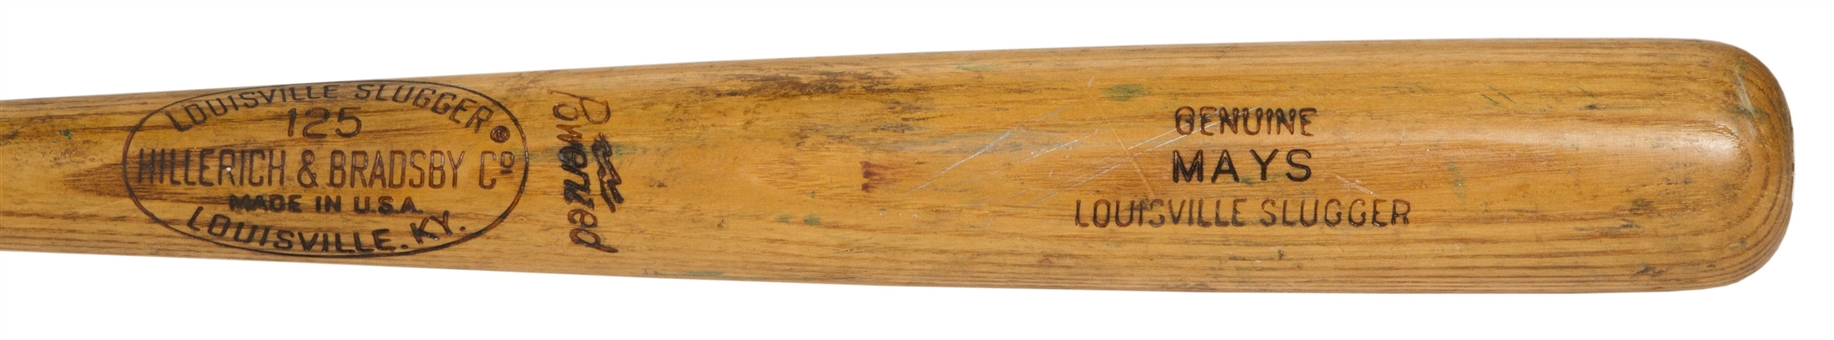 Outstanding 1966 Willie Mays Game Used and Vintage Signed  Hillerich and Bradsby S2 Model Bat (PSA/DNA GU 9.5 & JSA)